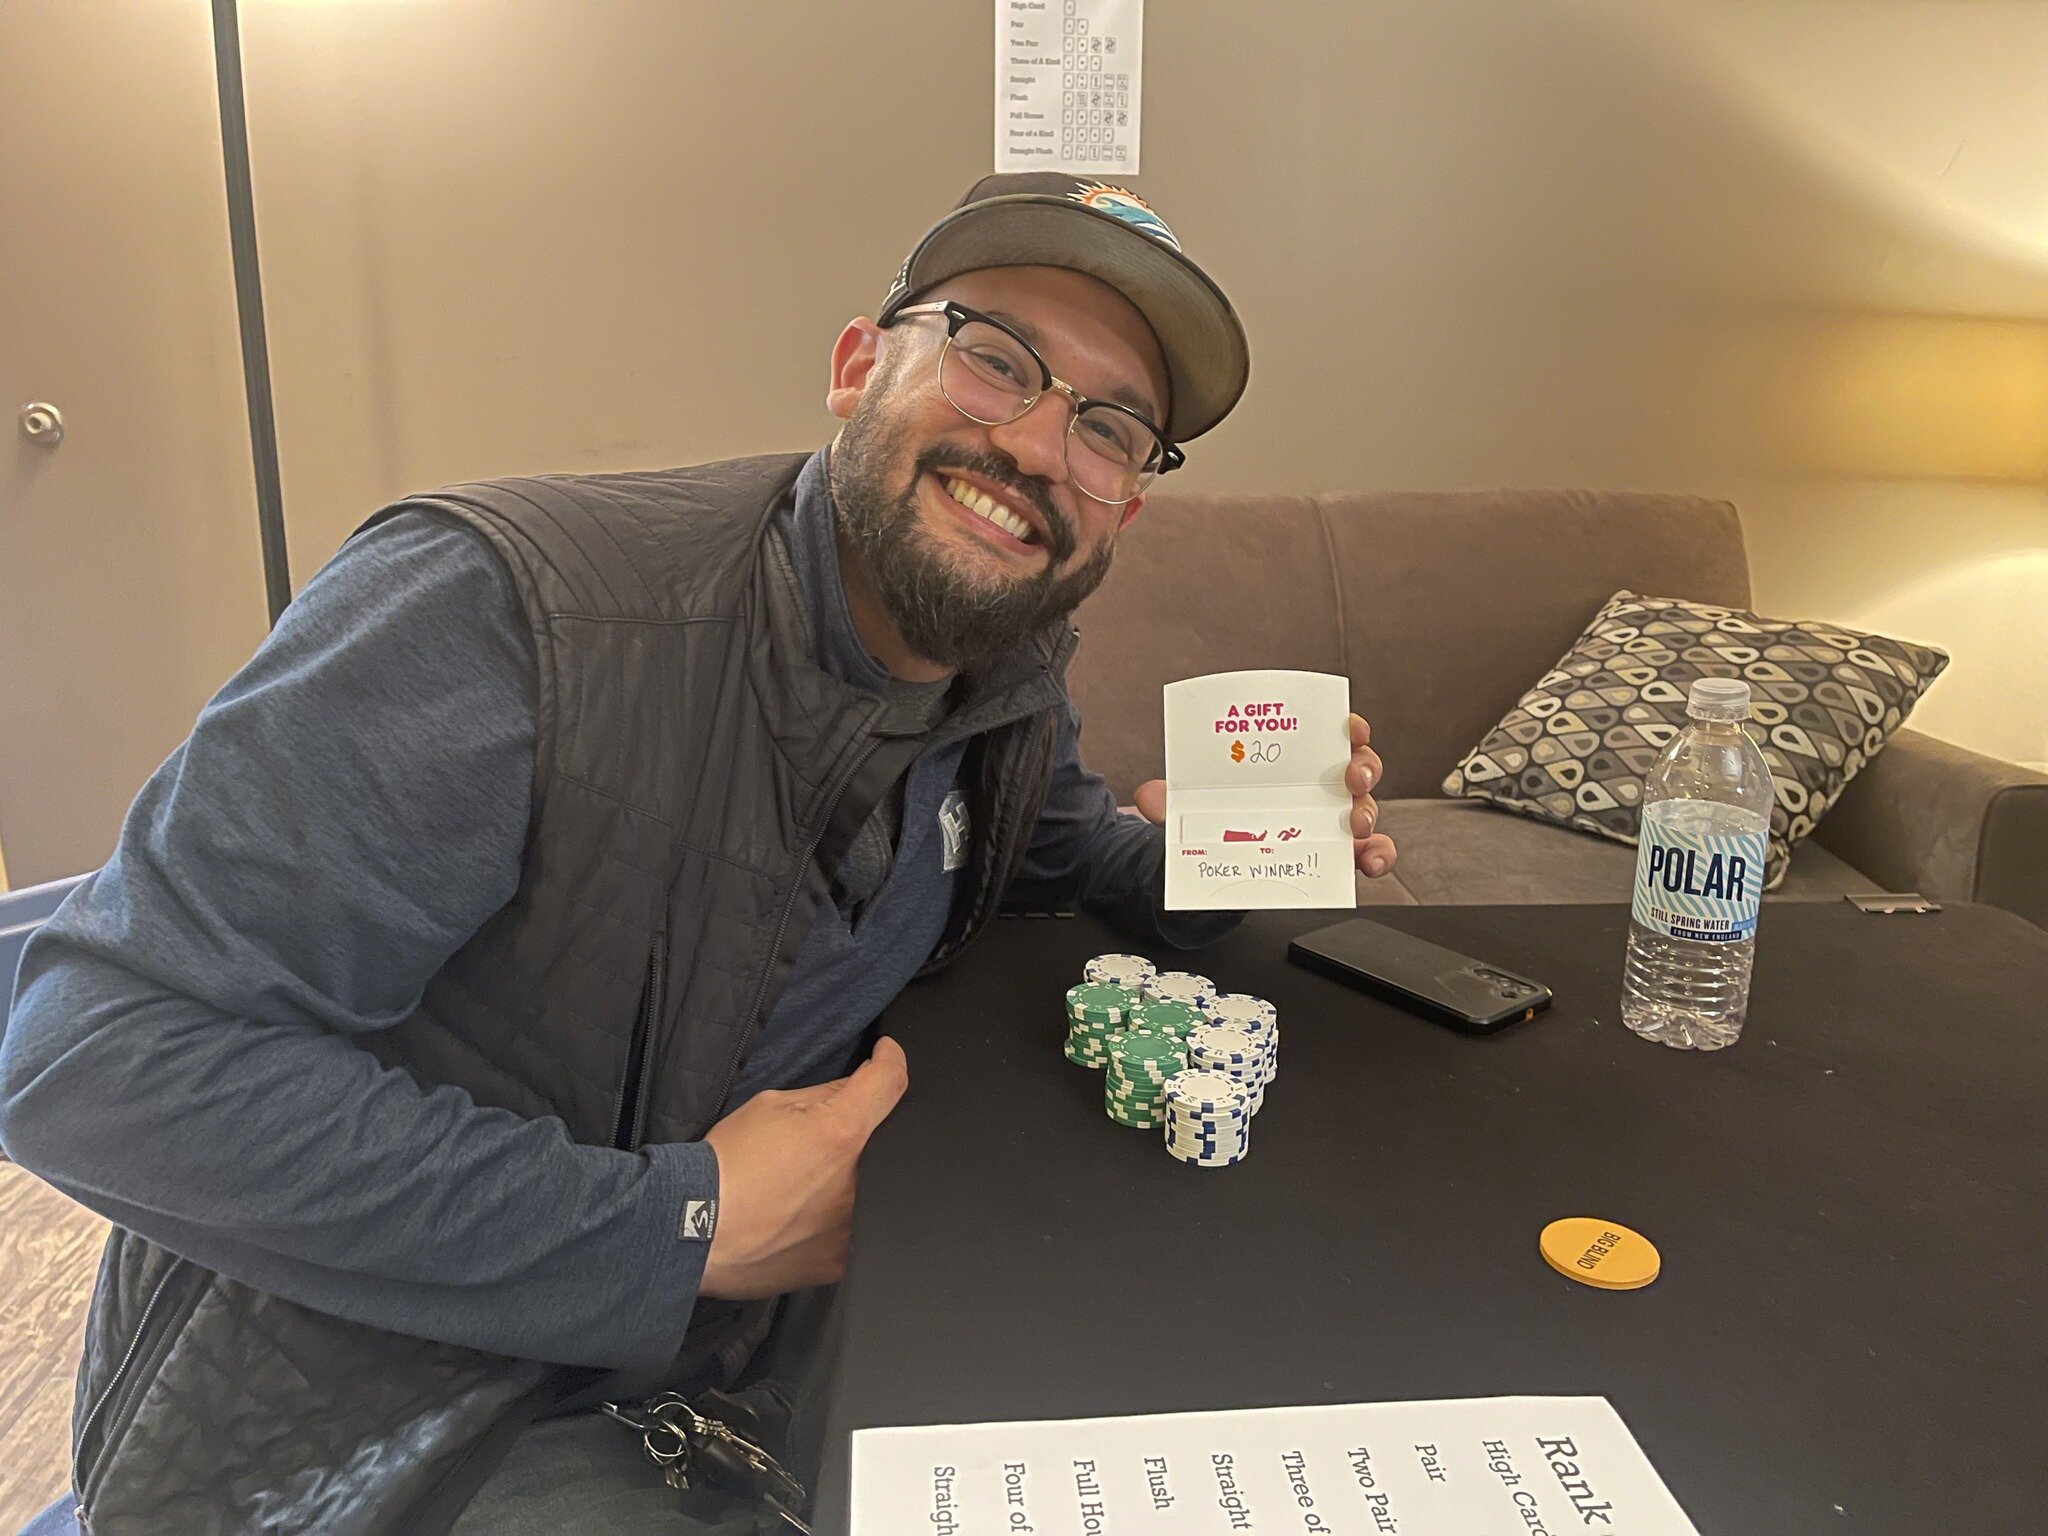 Last week High Output held a very successful game night in one of our studios for our crew! It was a night filled with pizza, video games, board games, and even a round of poker! By the end of some close matches, our Canton Shop Manager Javier came o